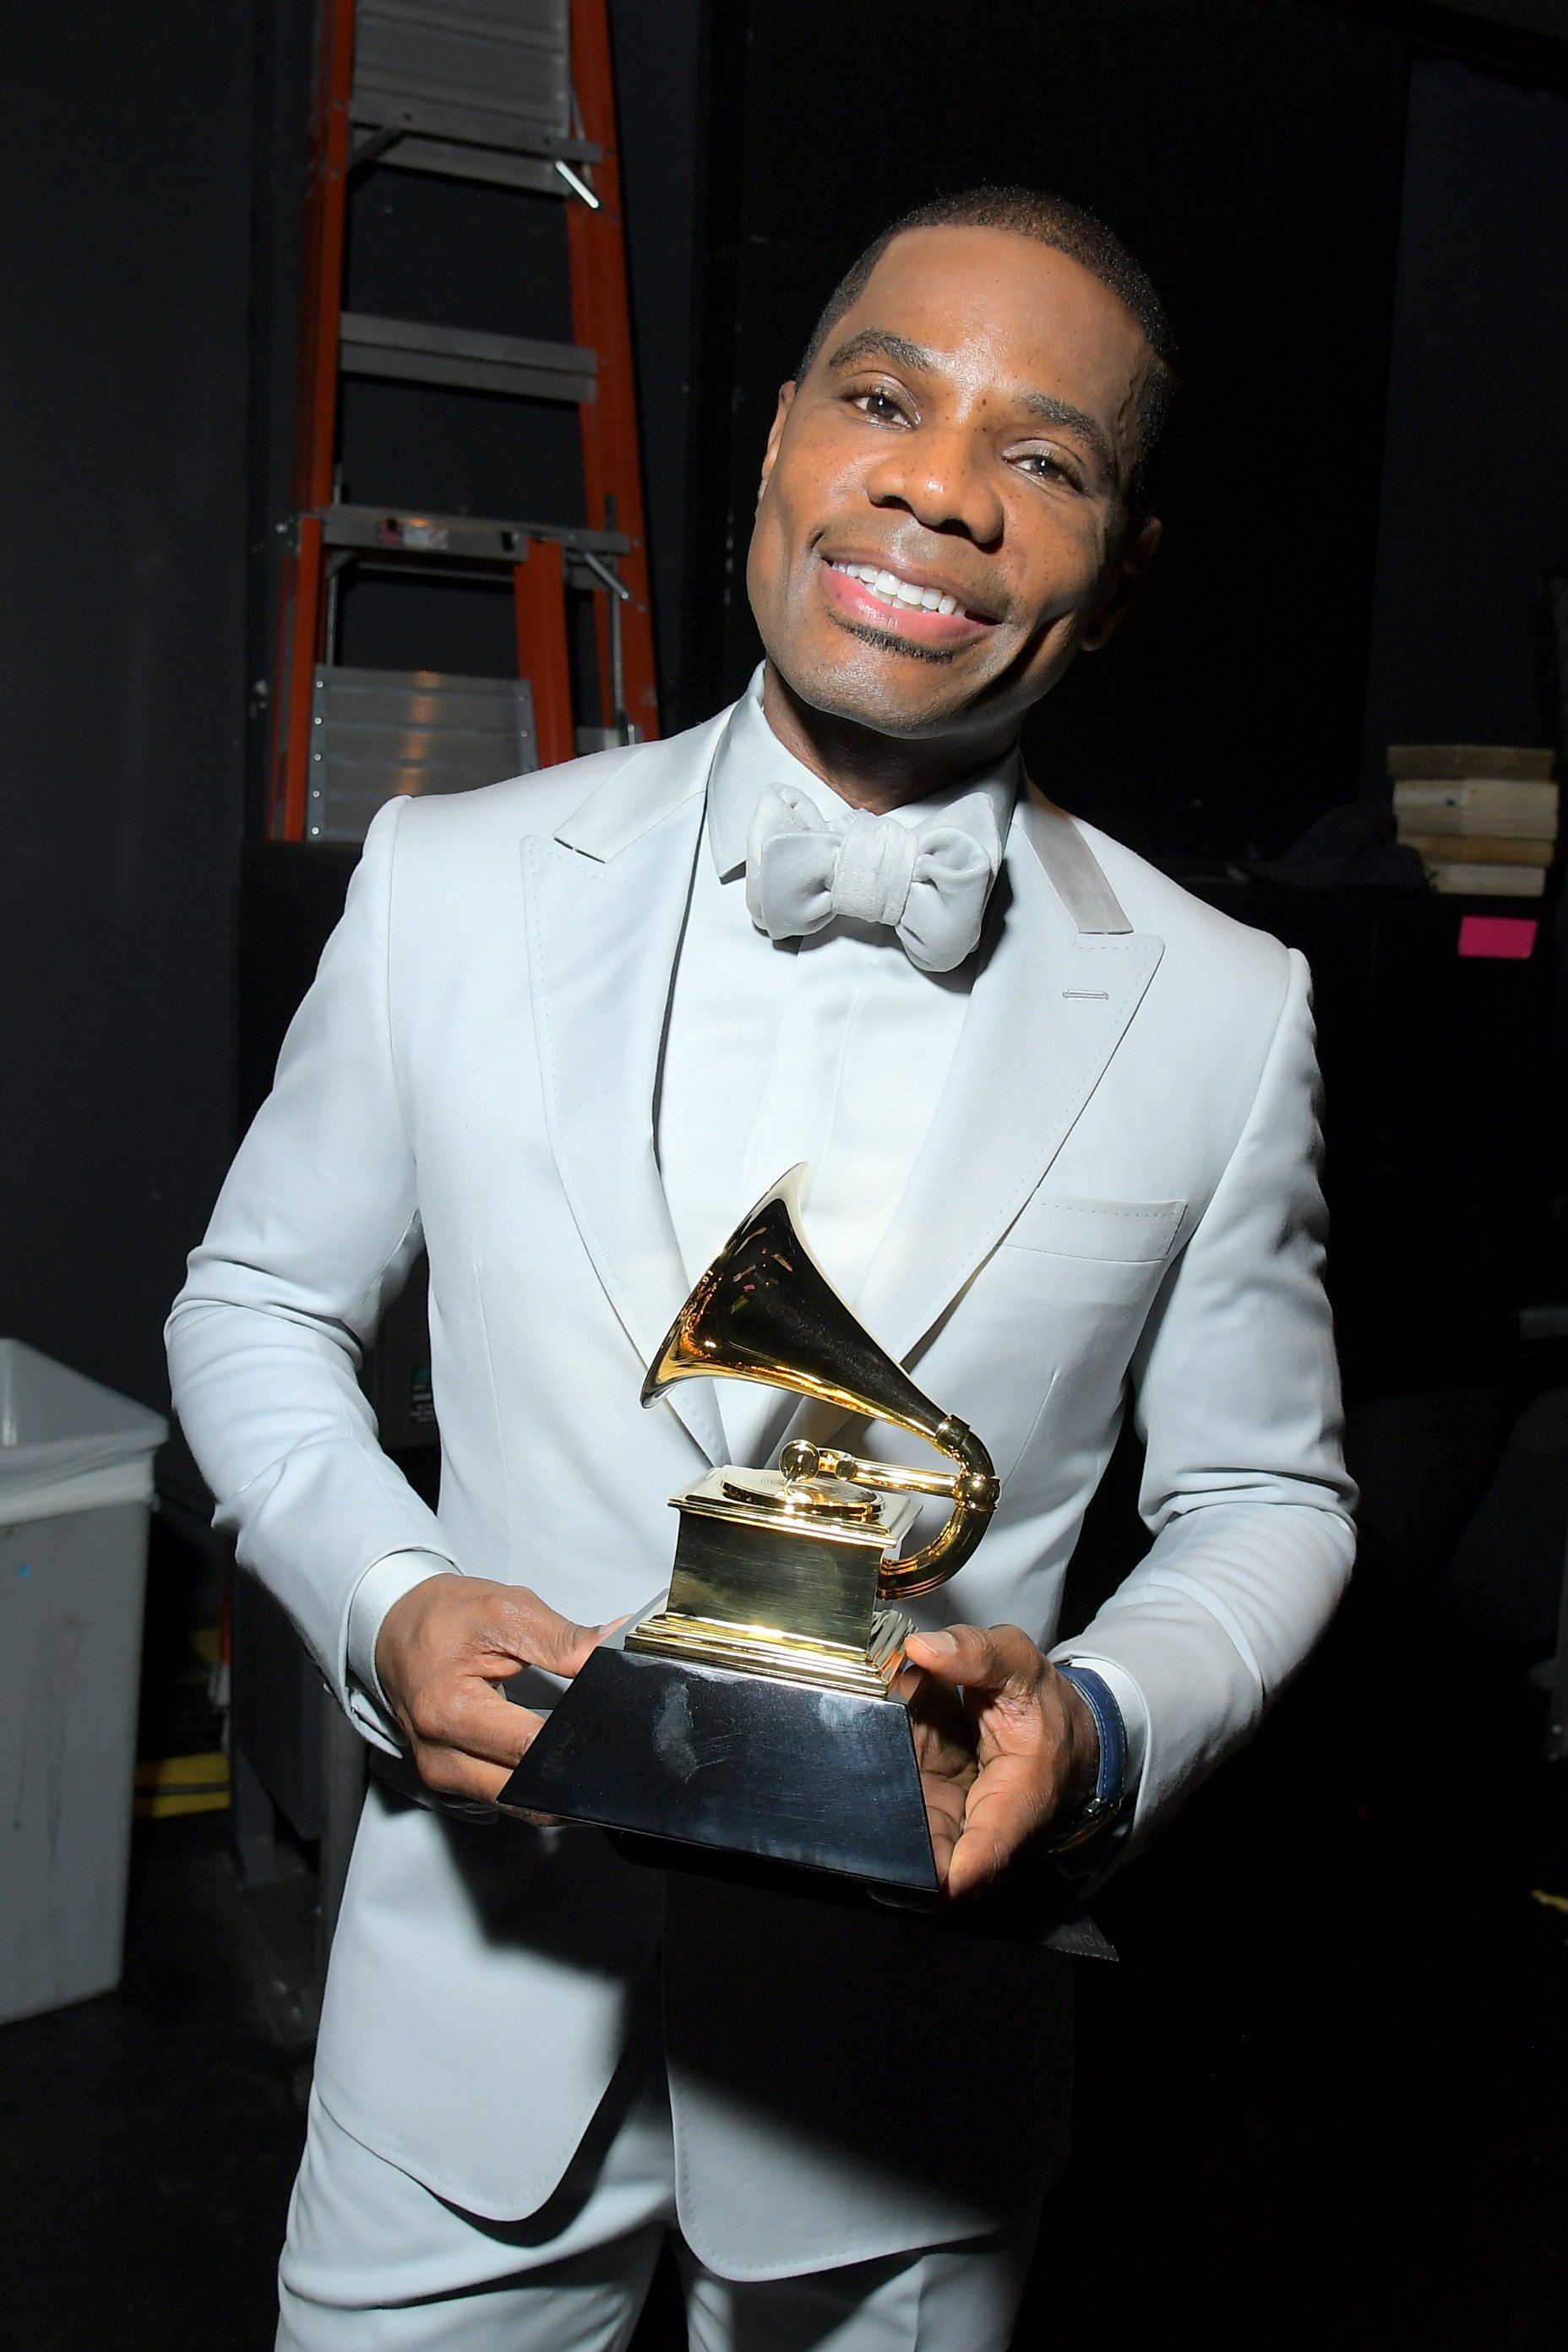 Kirk Franklin during the 62nd Annual Grammy Awards Premiere Ceremony at Microsoft Theater on January 26, 2020 in Los Angeles, California. | Source: Getty Images